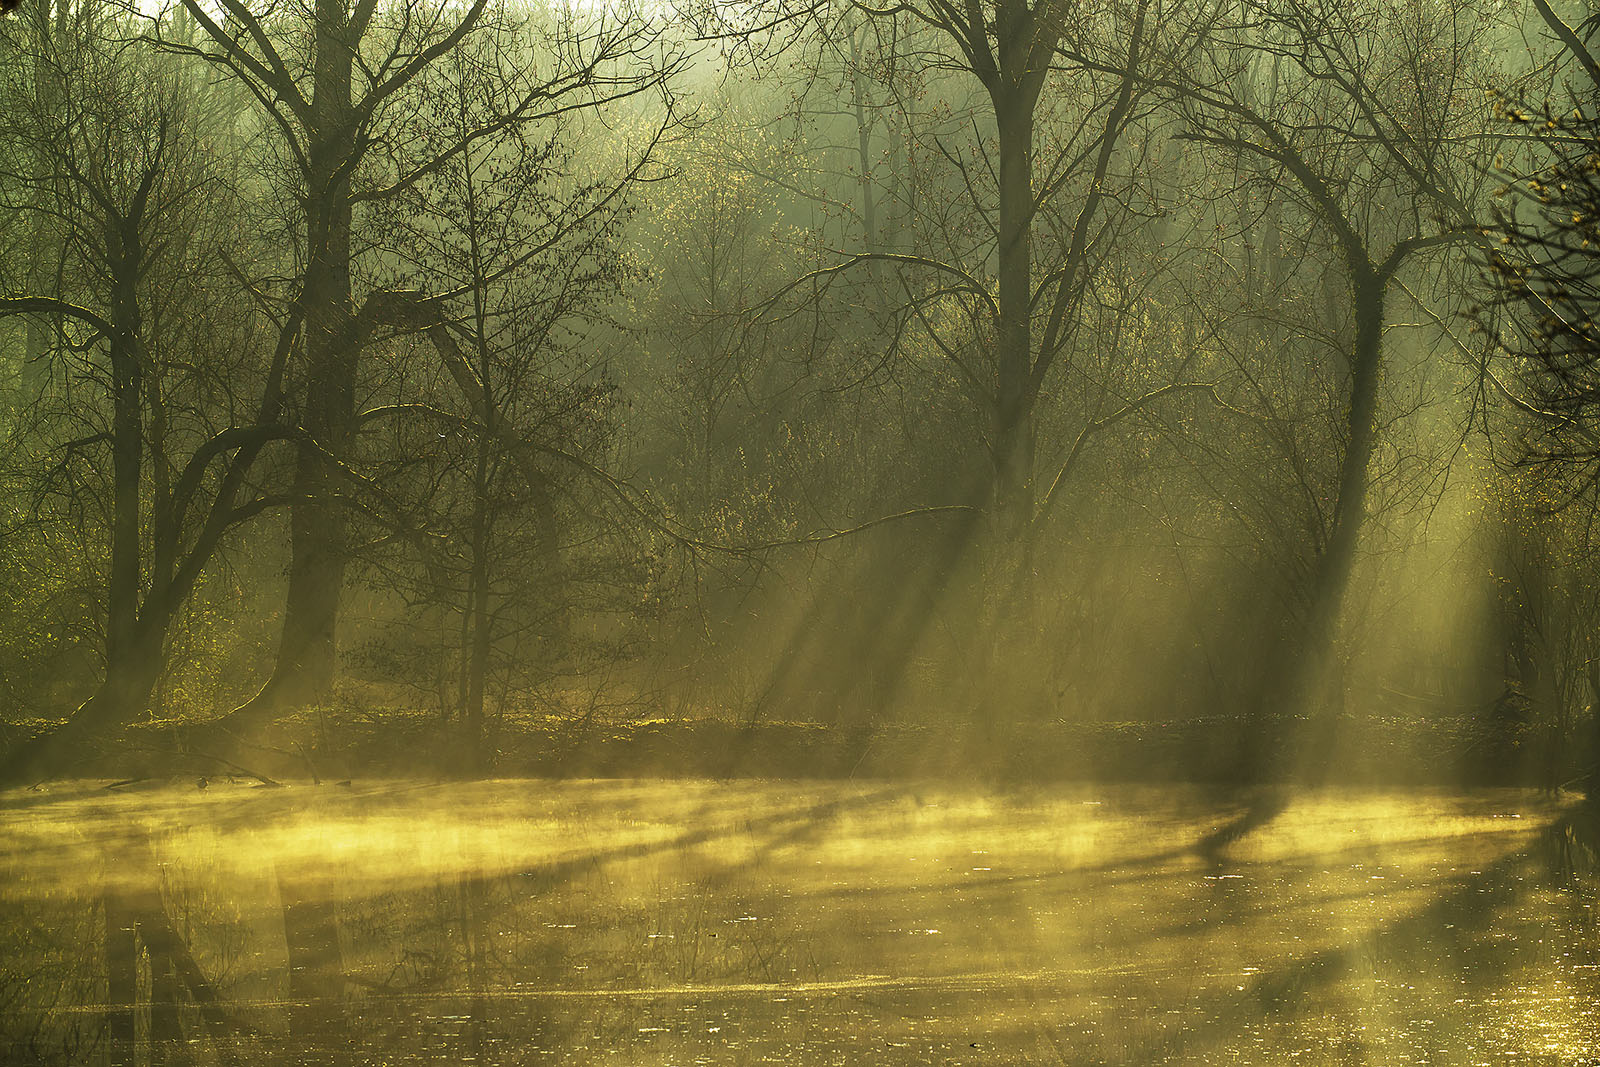 Modern photograph. A marshy wood with golden light filtering through the trees.